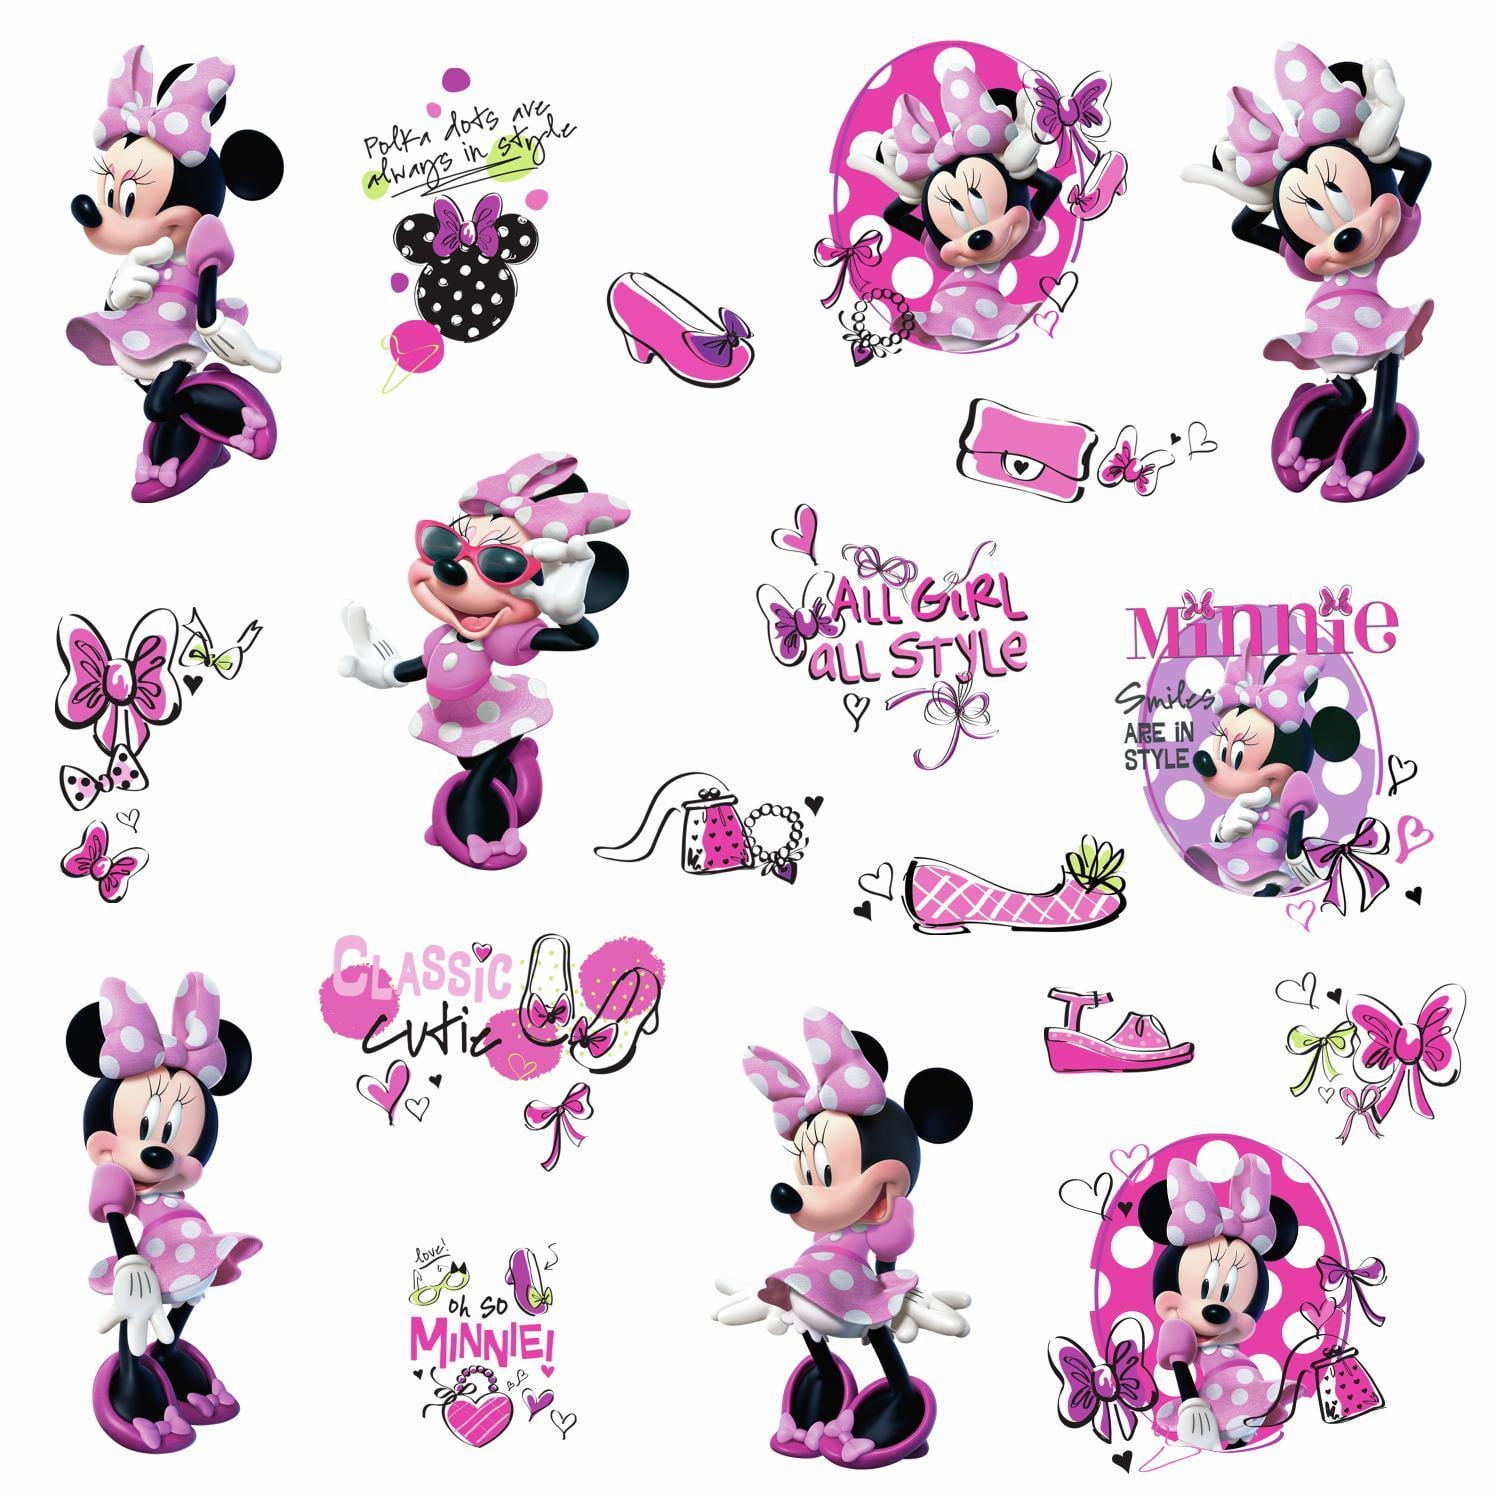 RoomMates Minnie Mouse Heart Confetti Peel And Stick Giant Wall Decals With Glitter York Wallcoverings RMK3593GM 